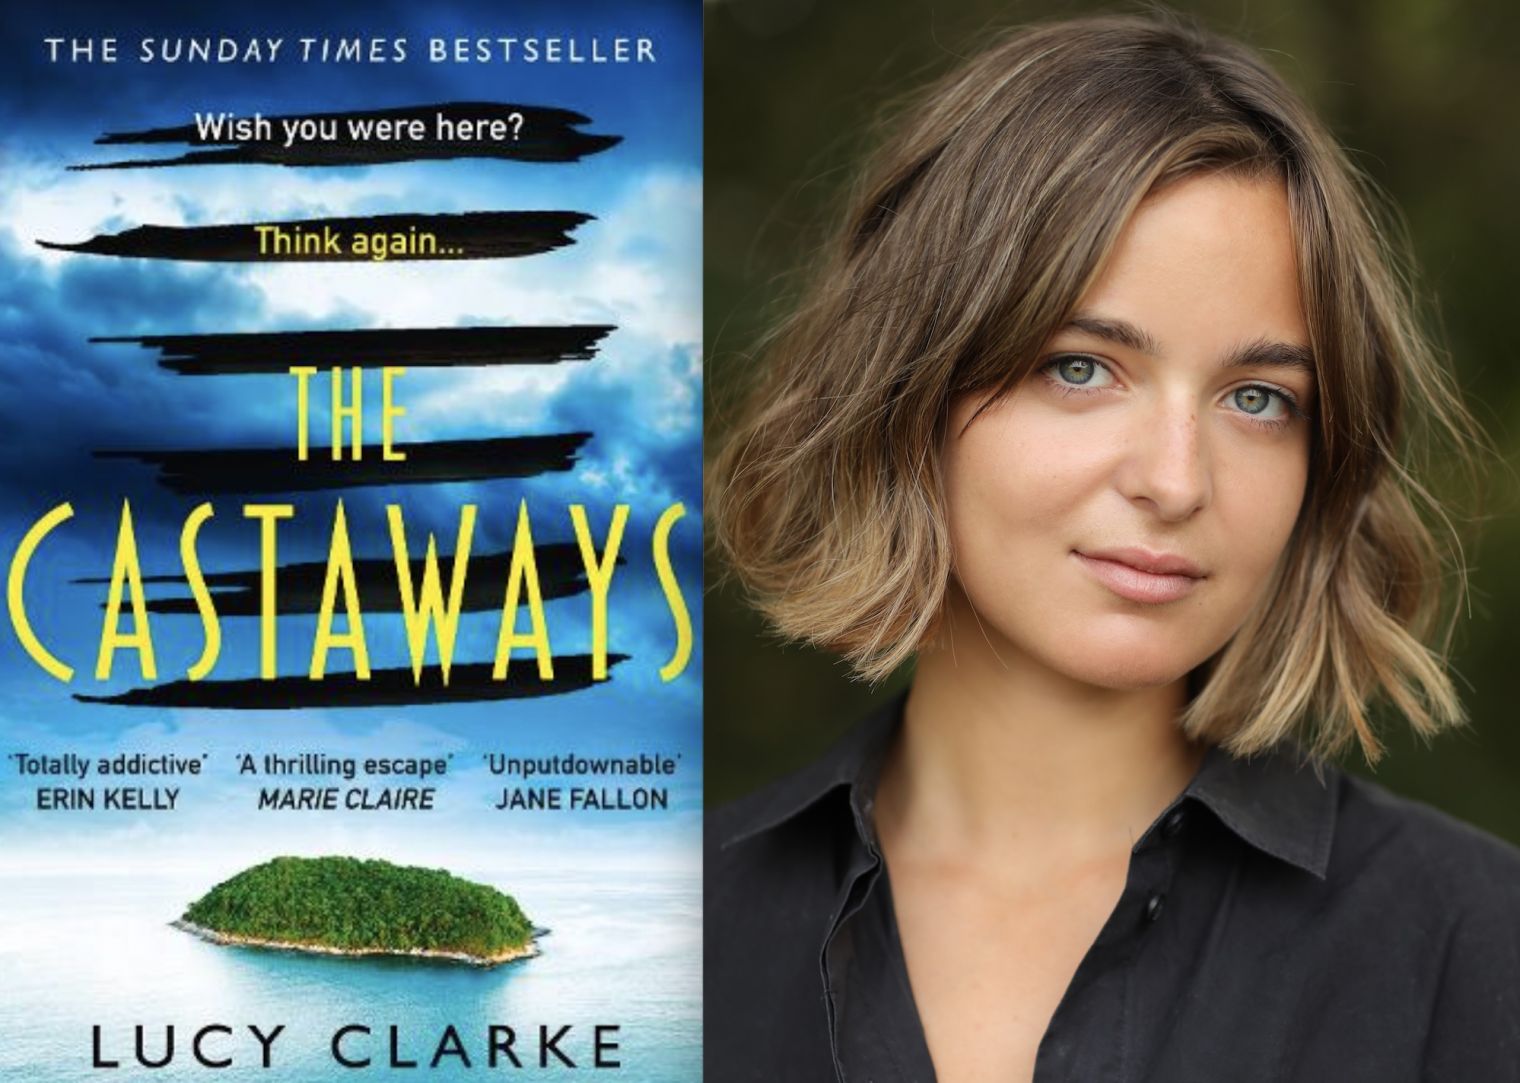 Celine Buckens has been cast as one of the leads in new Paramount+ thriller series ’The Castaways'